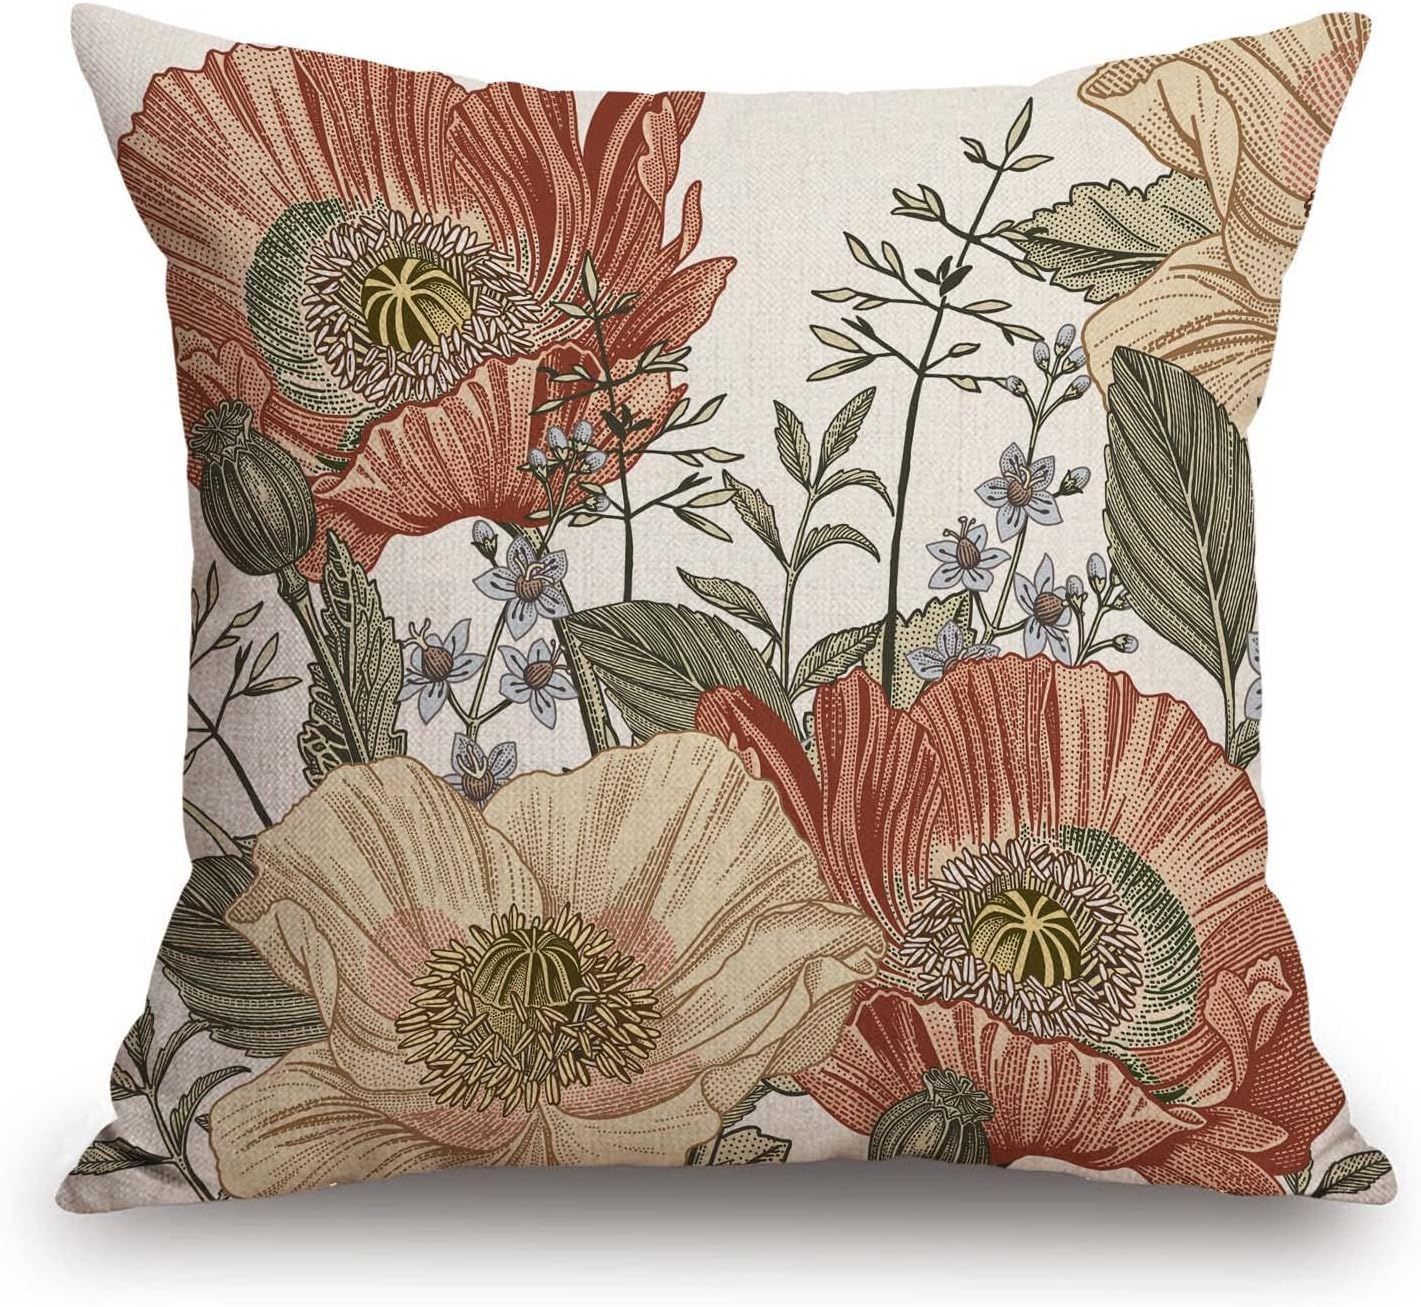 Vintage Flowers Pillow Cover Rustic Cotton Linen Decorative Square Throw Pillow Cover 18x18 Inch ... | Amazon (US)